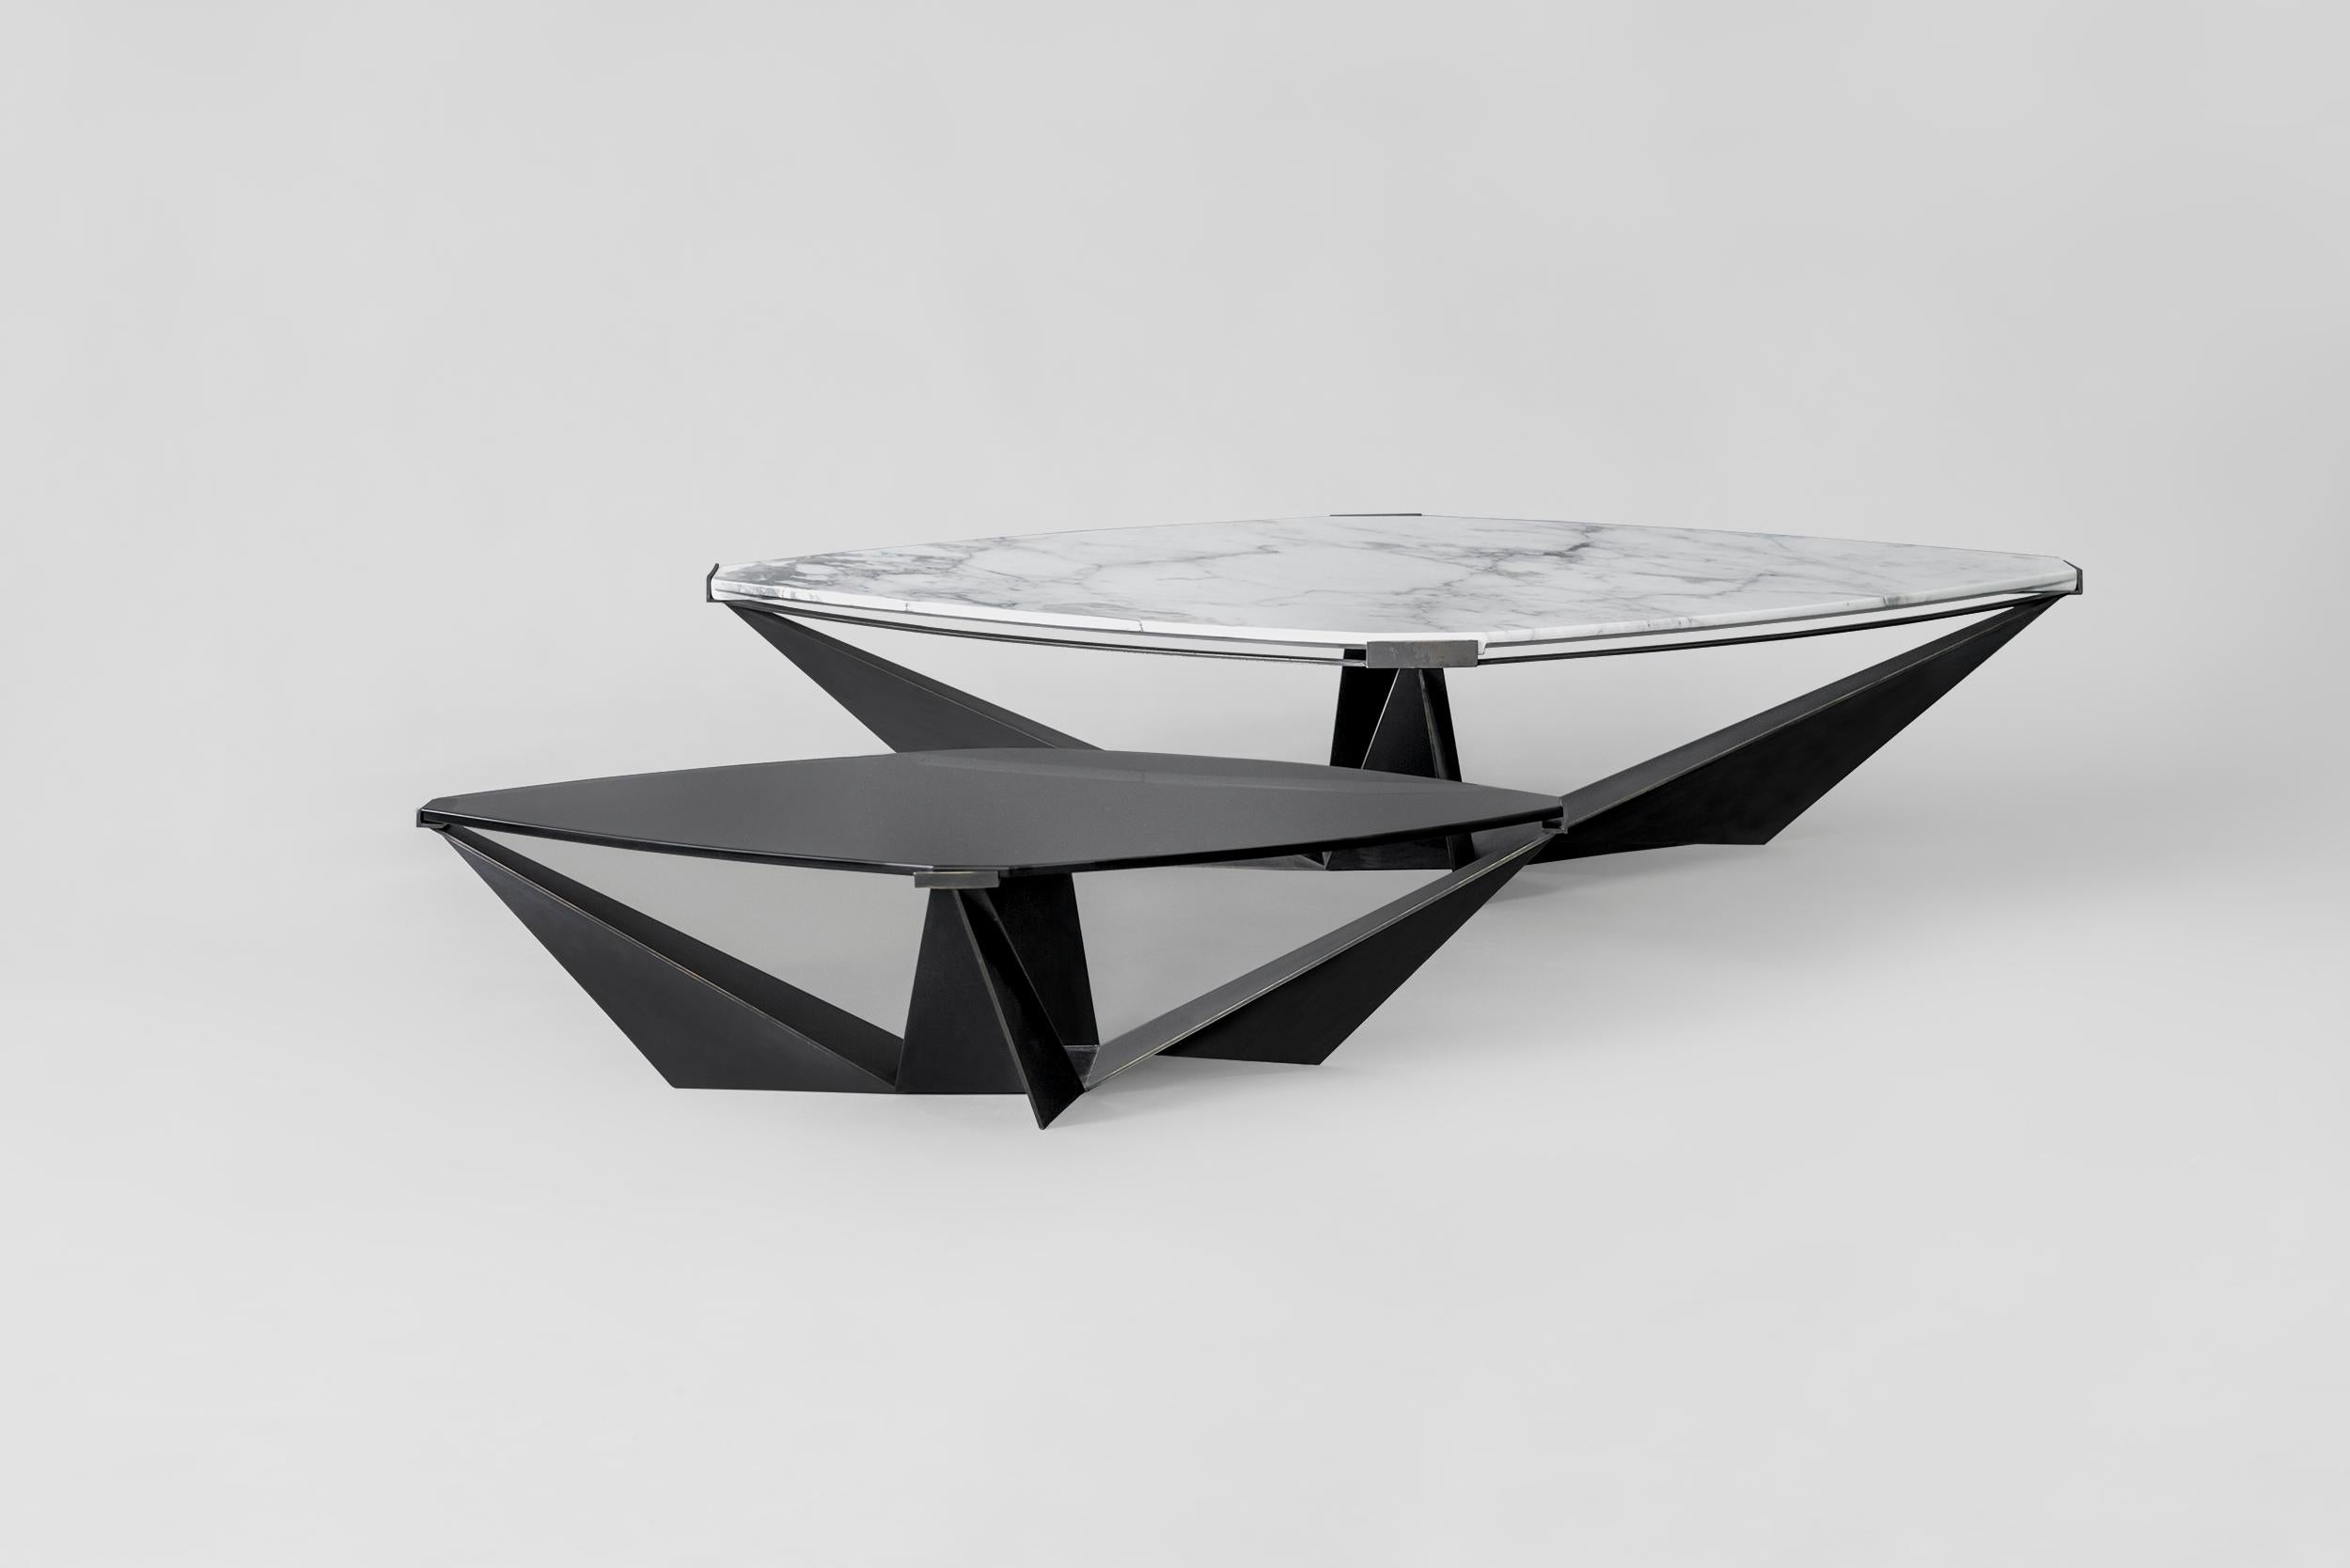 Set of 2 Kactus coffee table by Atra Design
Dimensions: D 49.7 x W 79.7 x H 20 cm / D 79.7 x W 119.8 x H 24.8 cm 
Materials: marble, glass, painted steel

The Kactis coffee table set comes with two angular tables. Each comes with marble or glass top